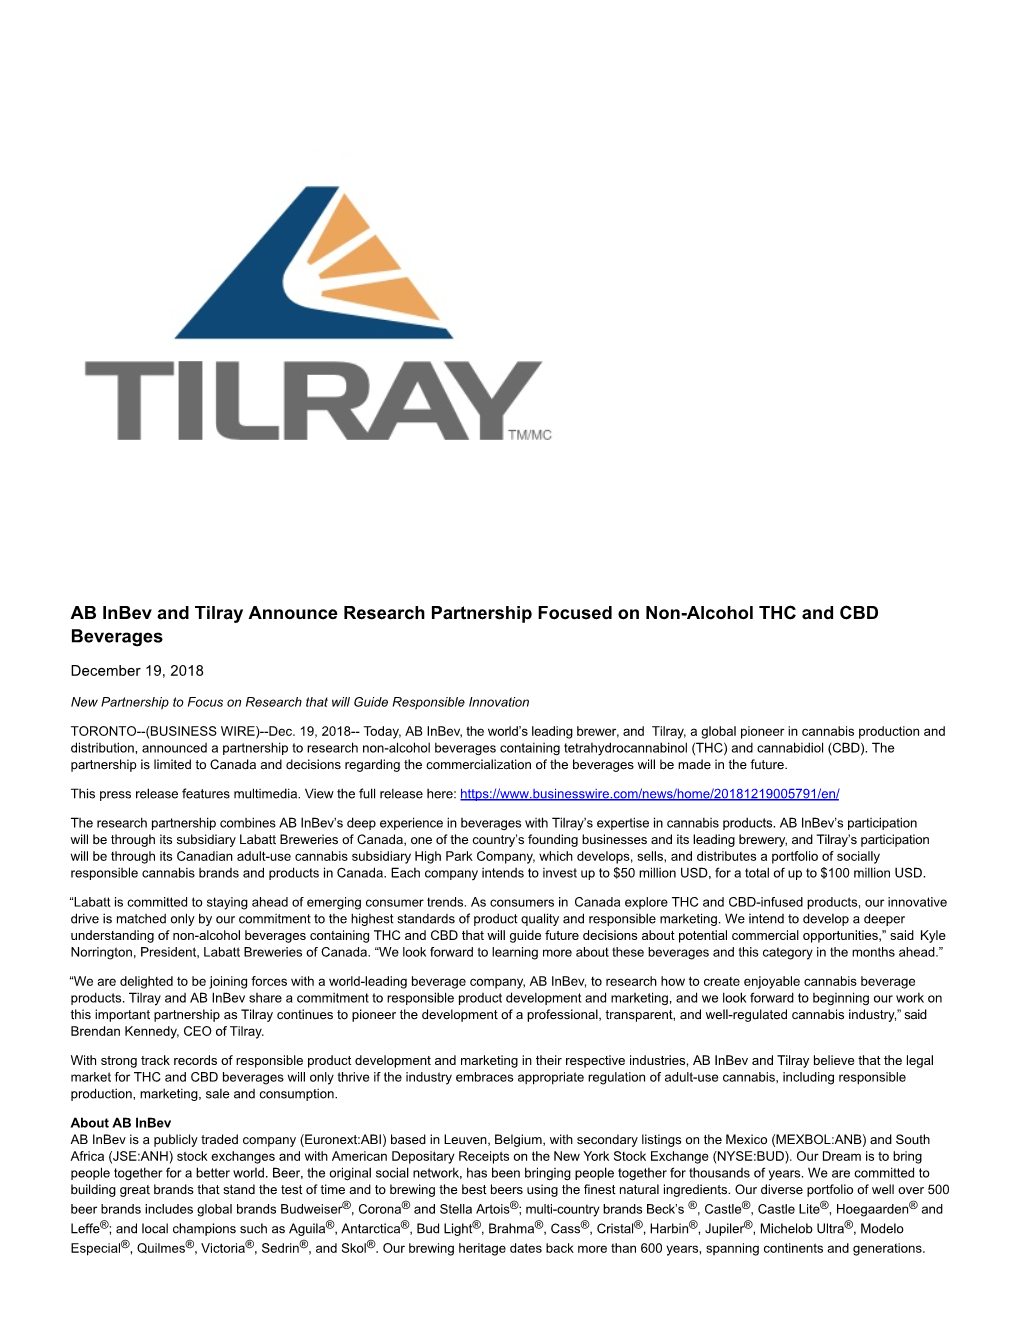 AB Inbev and Tilray Announce Research Partnership Focused on Non-Alcohol THC and CBD Beverages